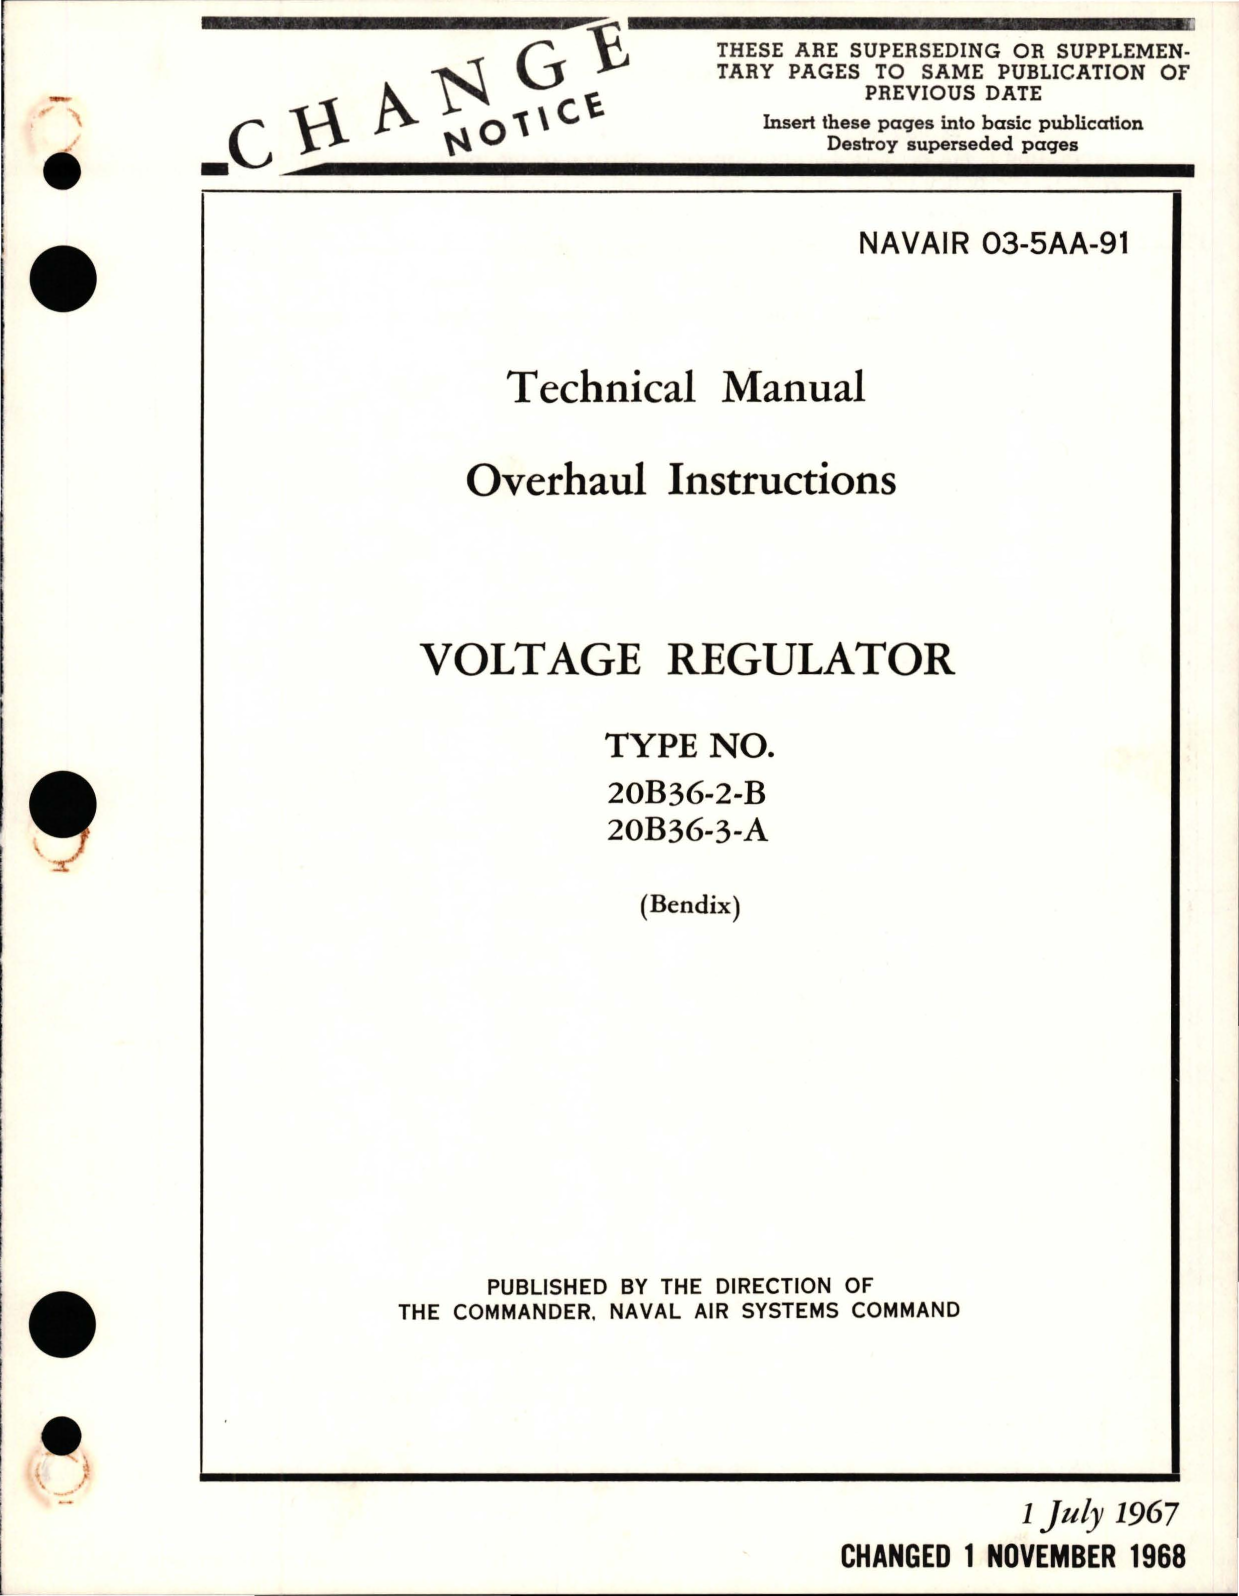 Sample page 1 from AirCorps Library document: Overhaul Instructions for Voltage Regulator - Type 20B36-2-B, 20B36-3-A